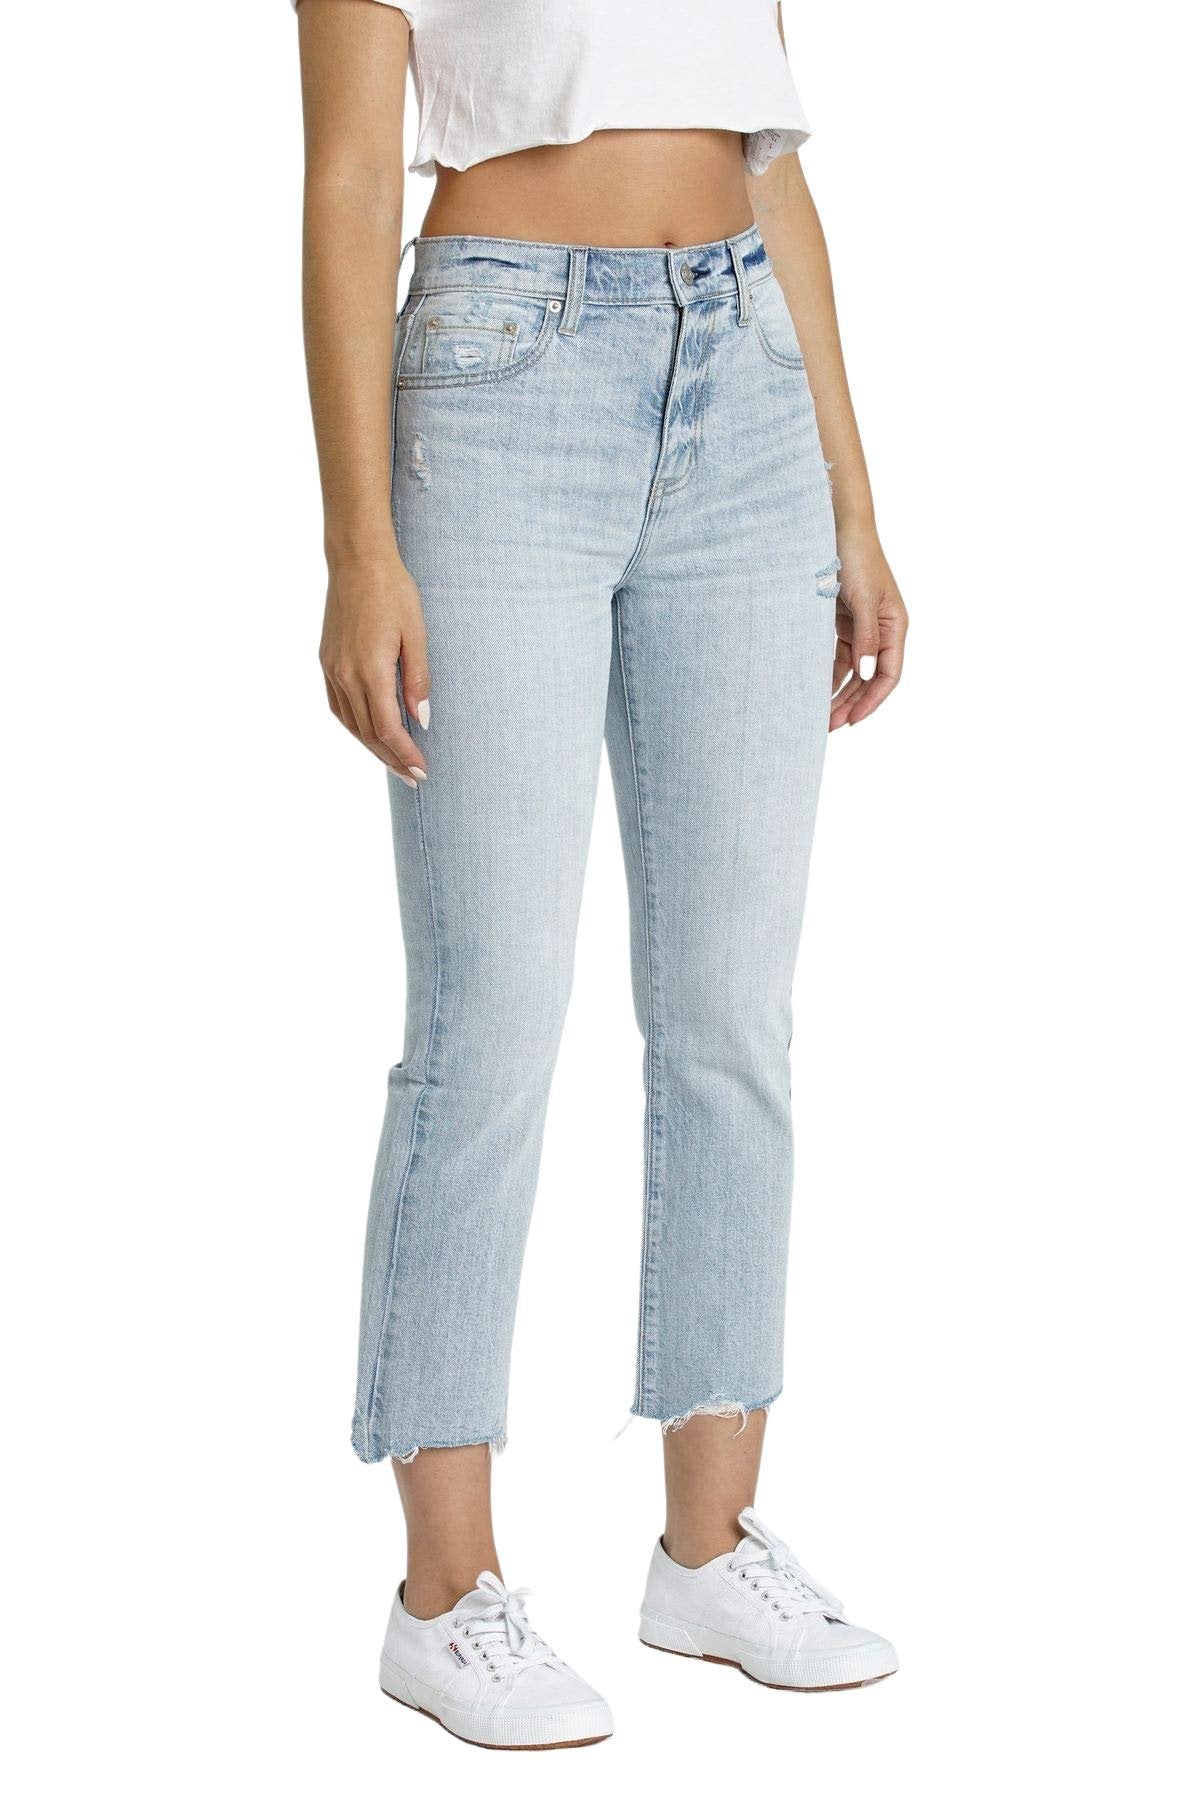 DAZE Shy Girl High Rise Crop Flare Jeans in Eye Contact - Side